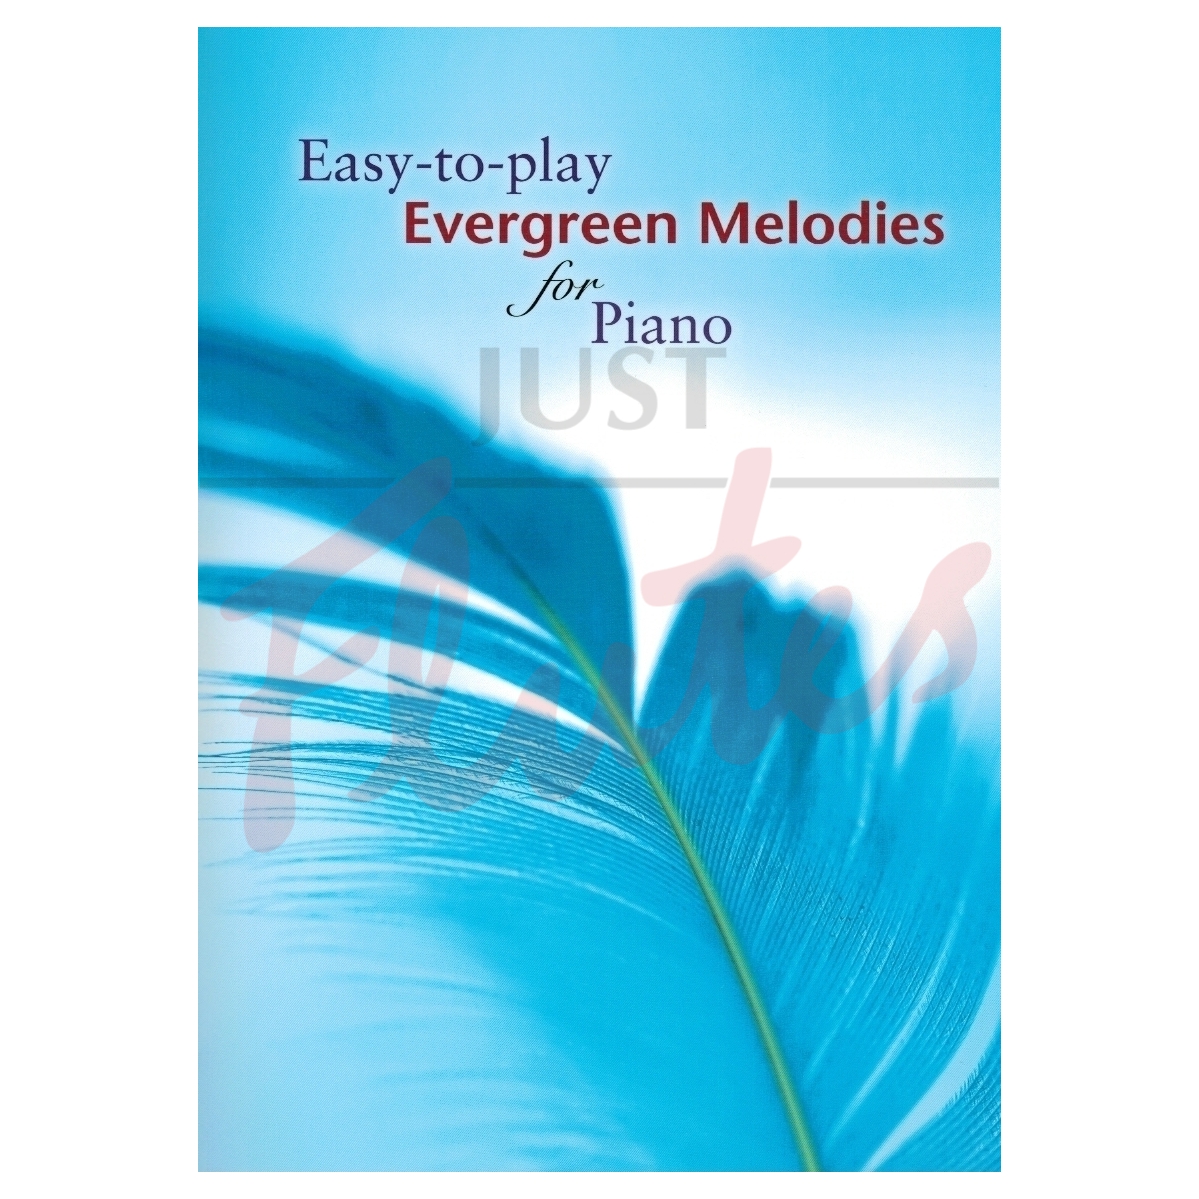 Easy-to-play Evergreen Melodies for Piano